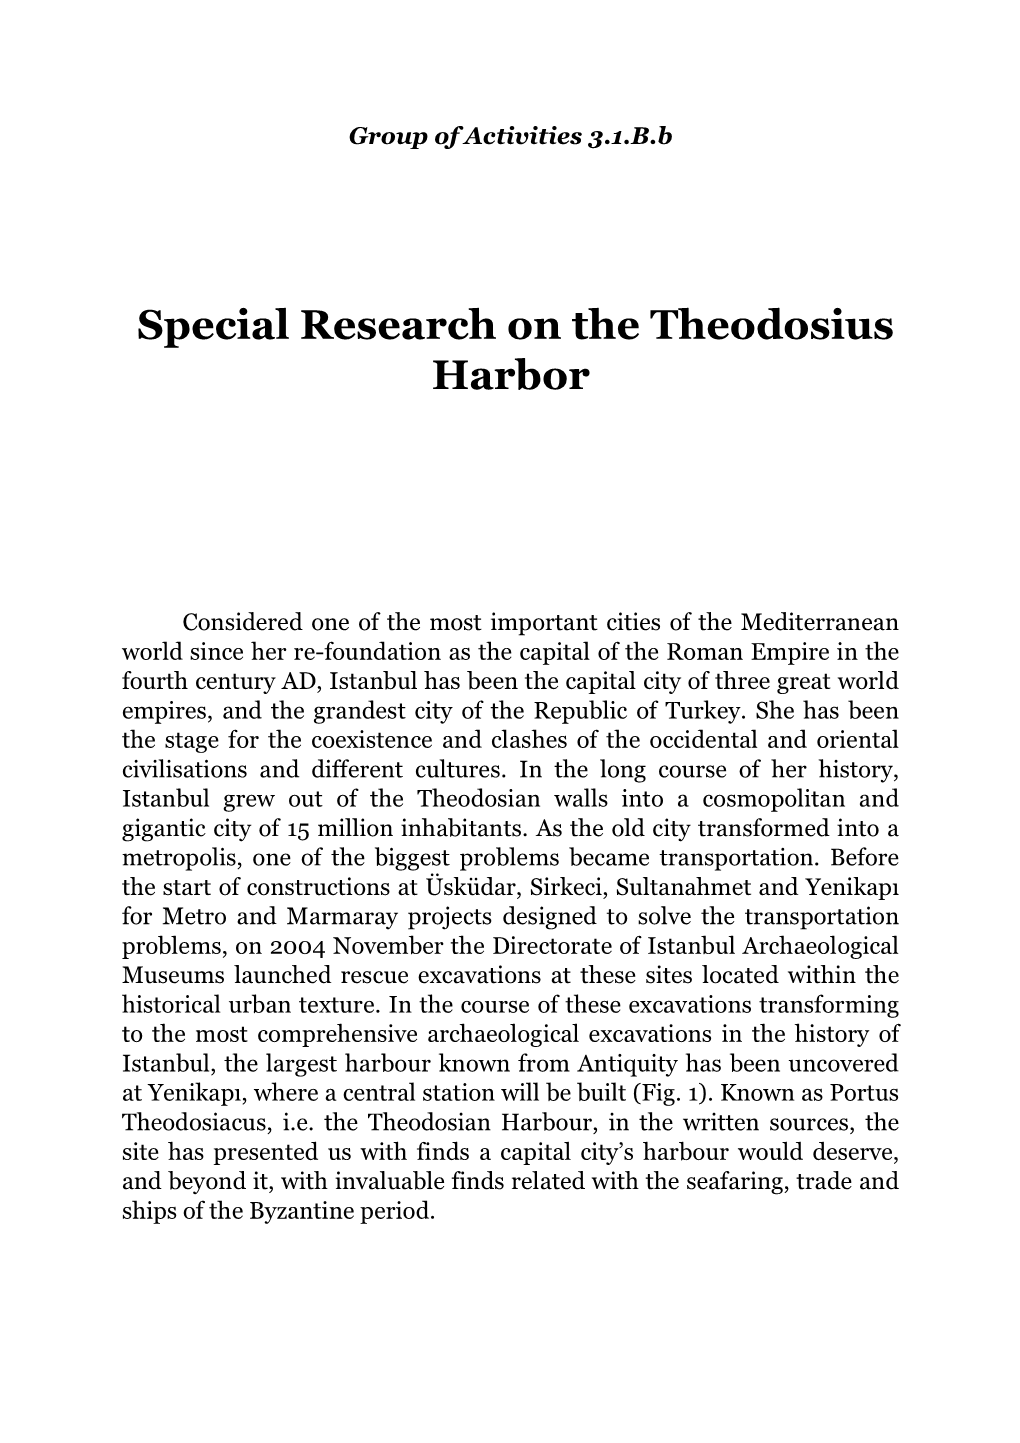 Special Research on the Theodosius Harbor